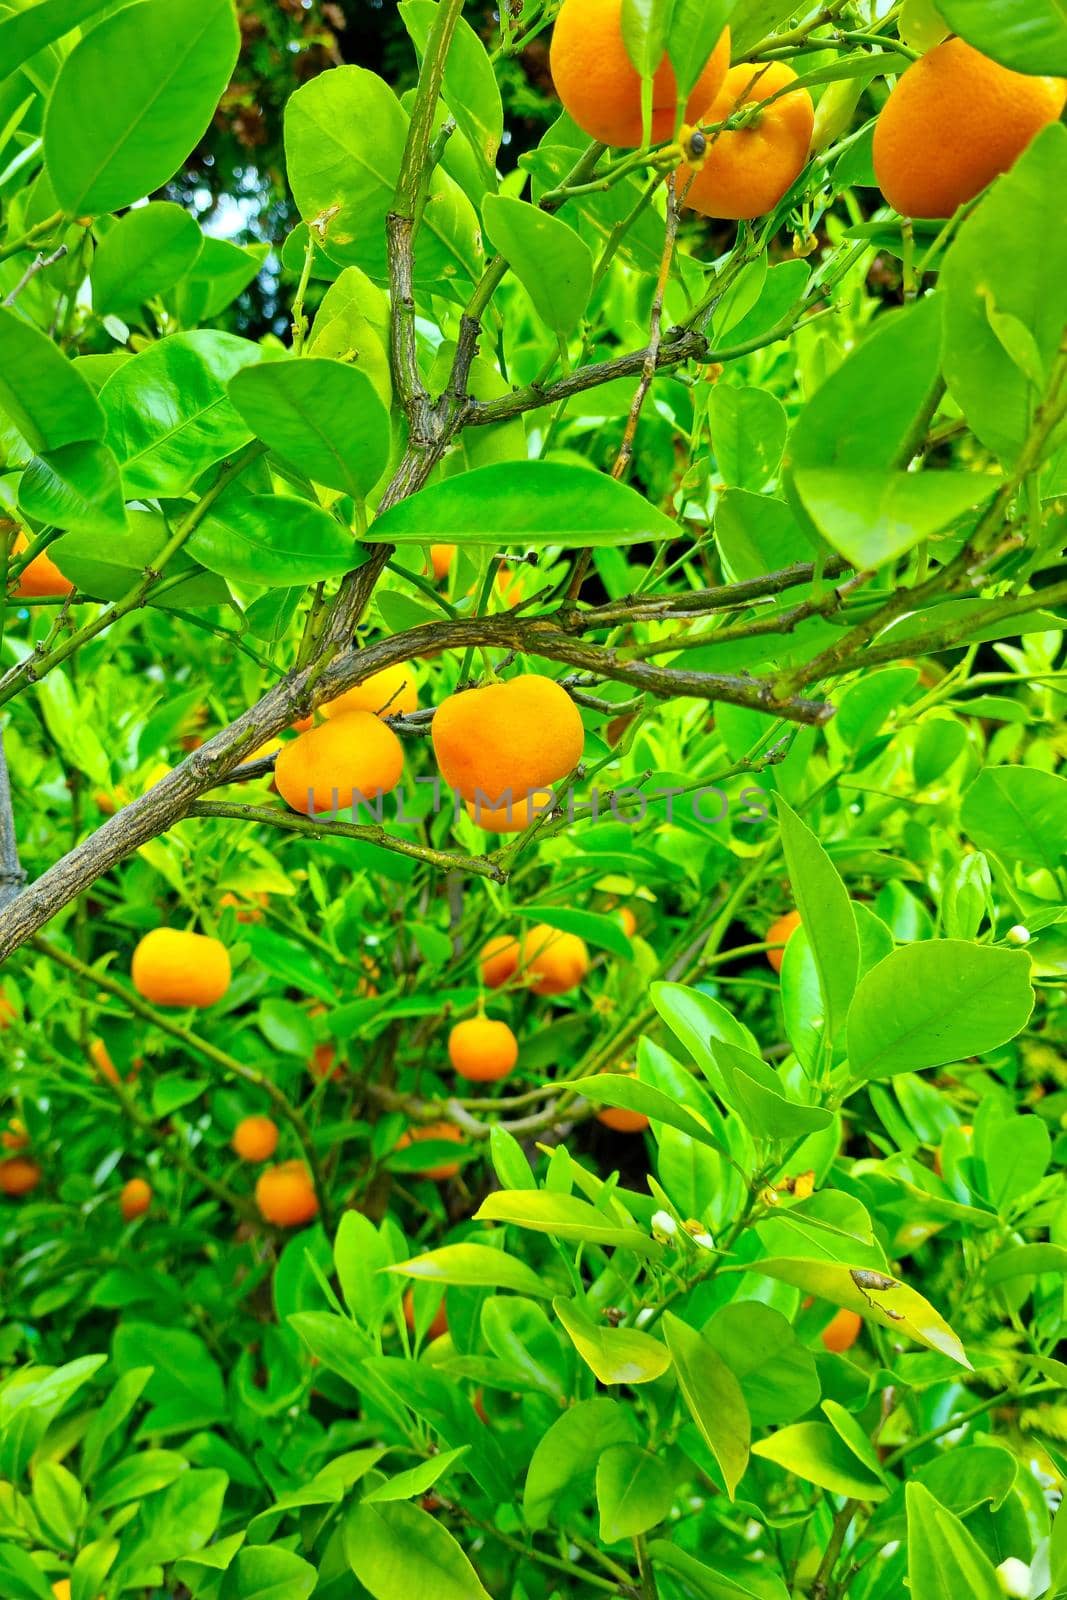 Ripe tangerines on branches in the garden